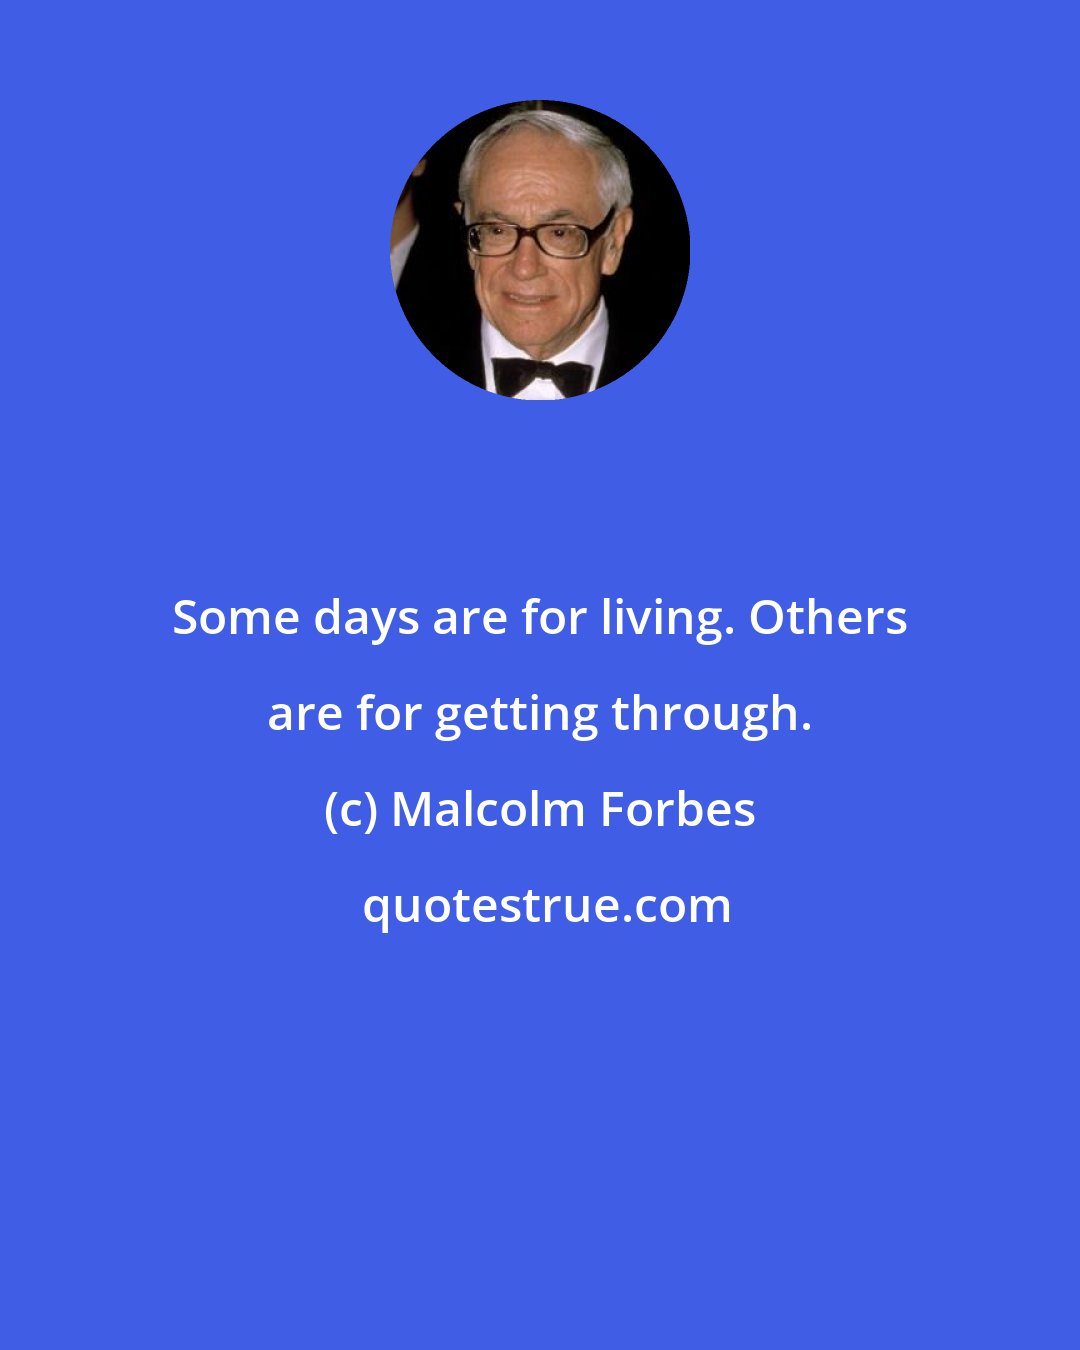 Malcolm Forbes: Some days are for living. Others are for getting through.